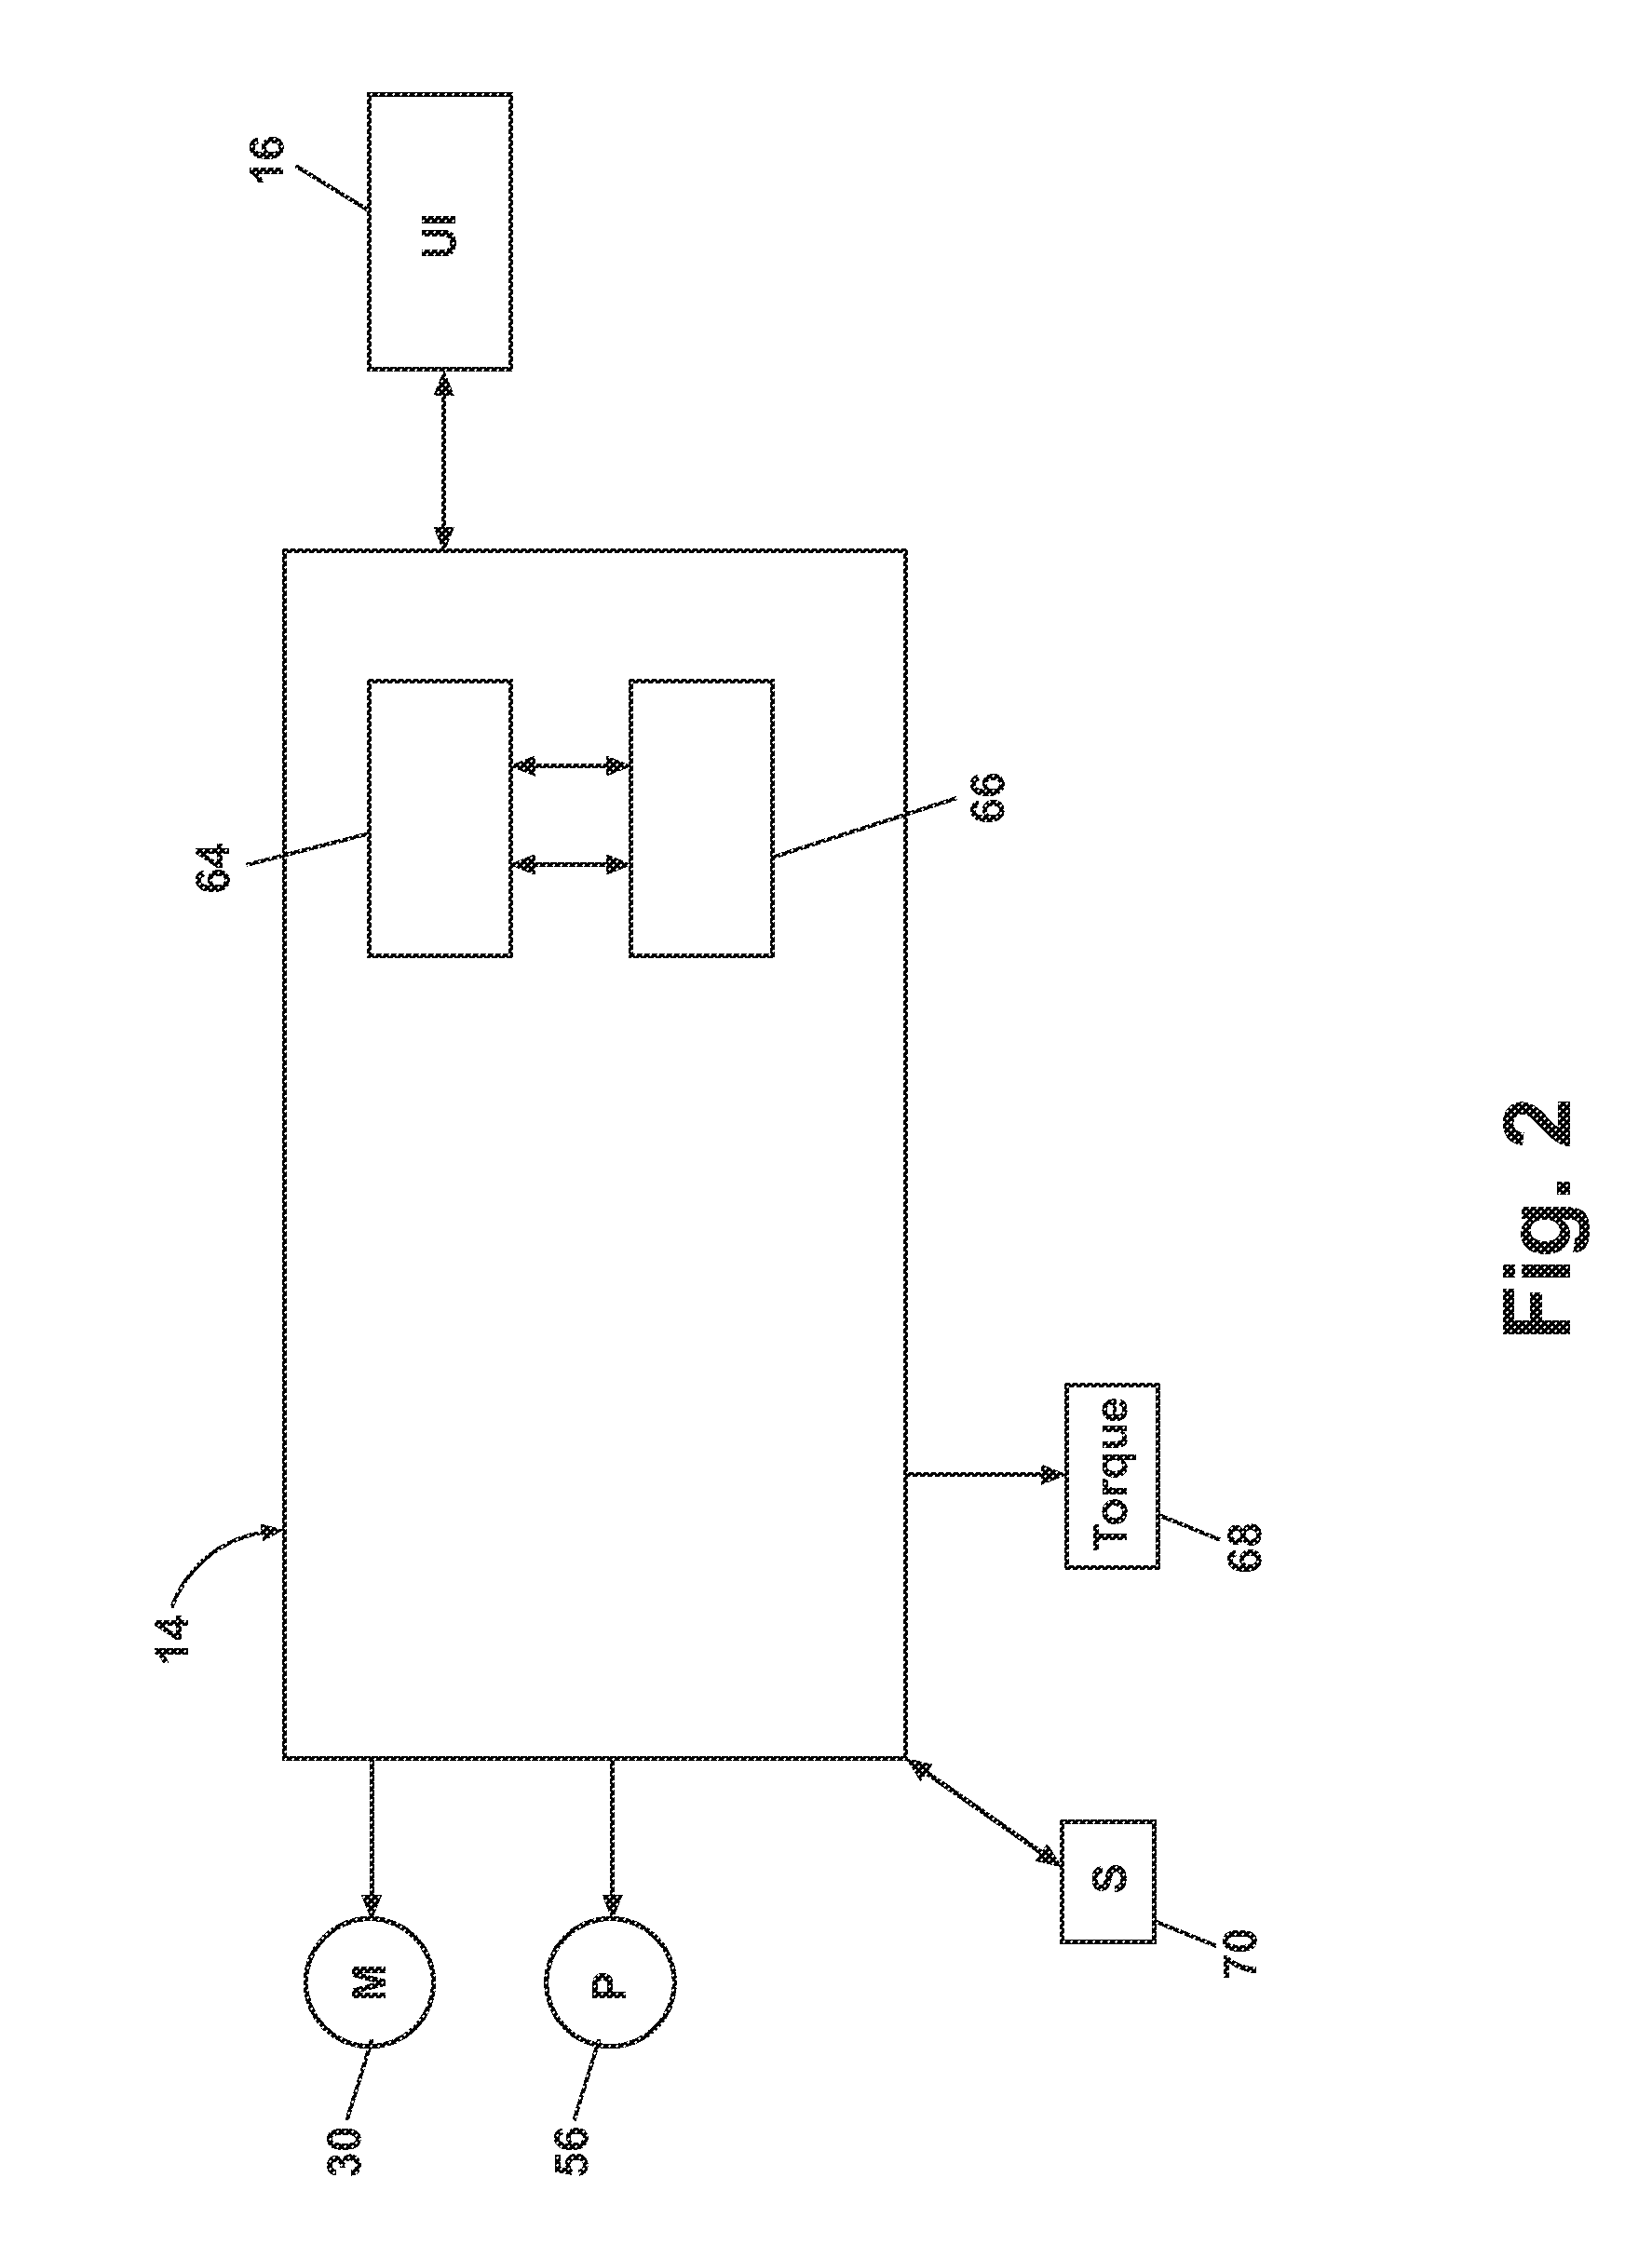 Method and apparatus for redistributing an imbalance in a laundry treating appliance